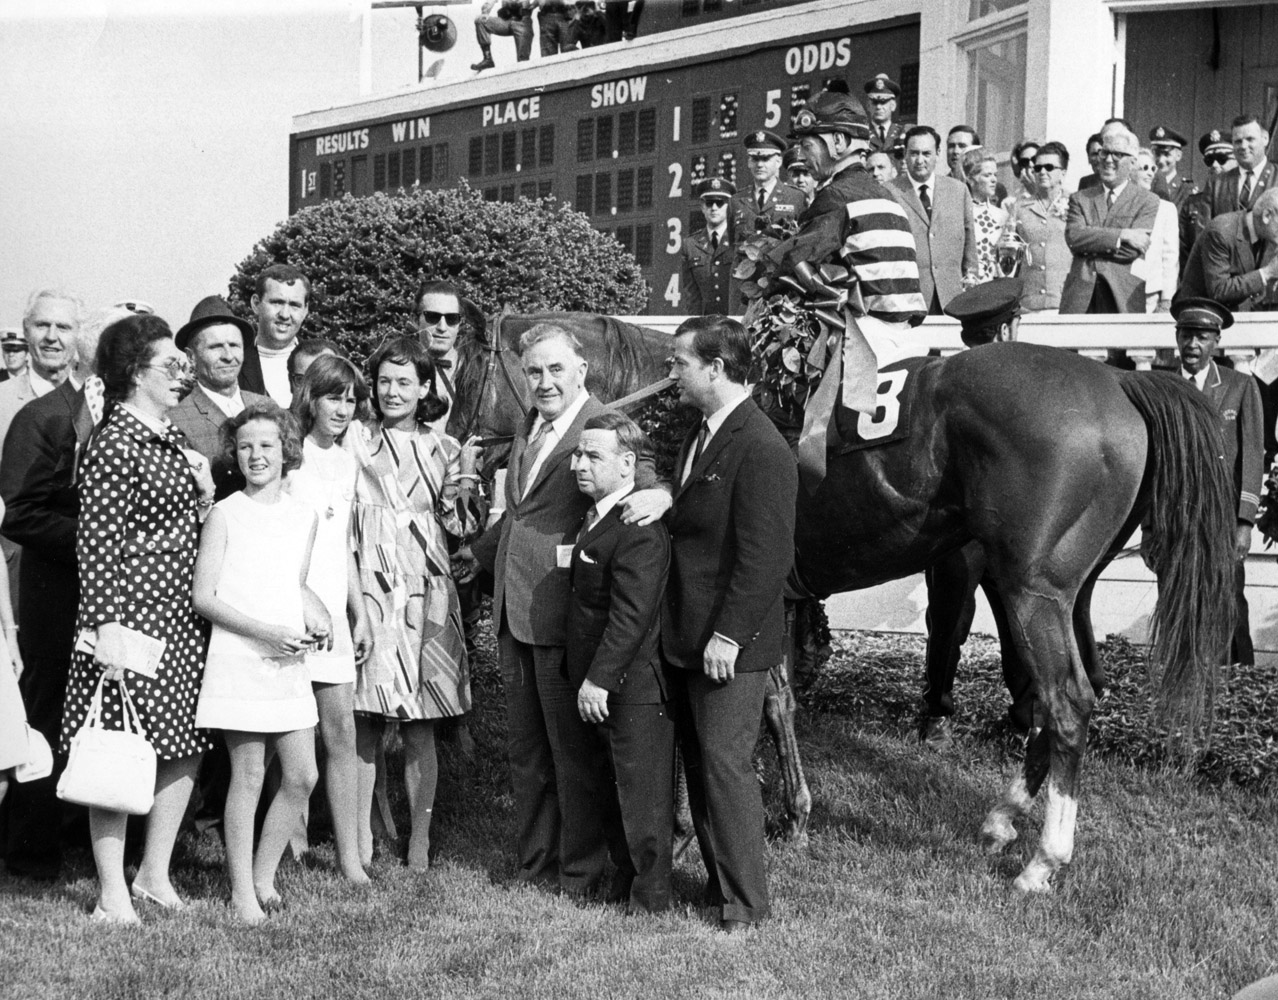 Majestic Prince and his connections (including his trainer, Hall of Fame jockey Johnny Longden) in the winner's circle for the 1969 Kentucky Derby (Museum Collection)